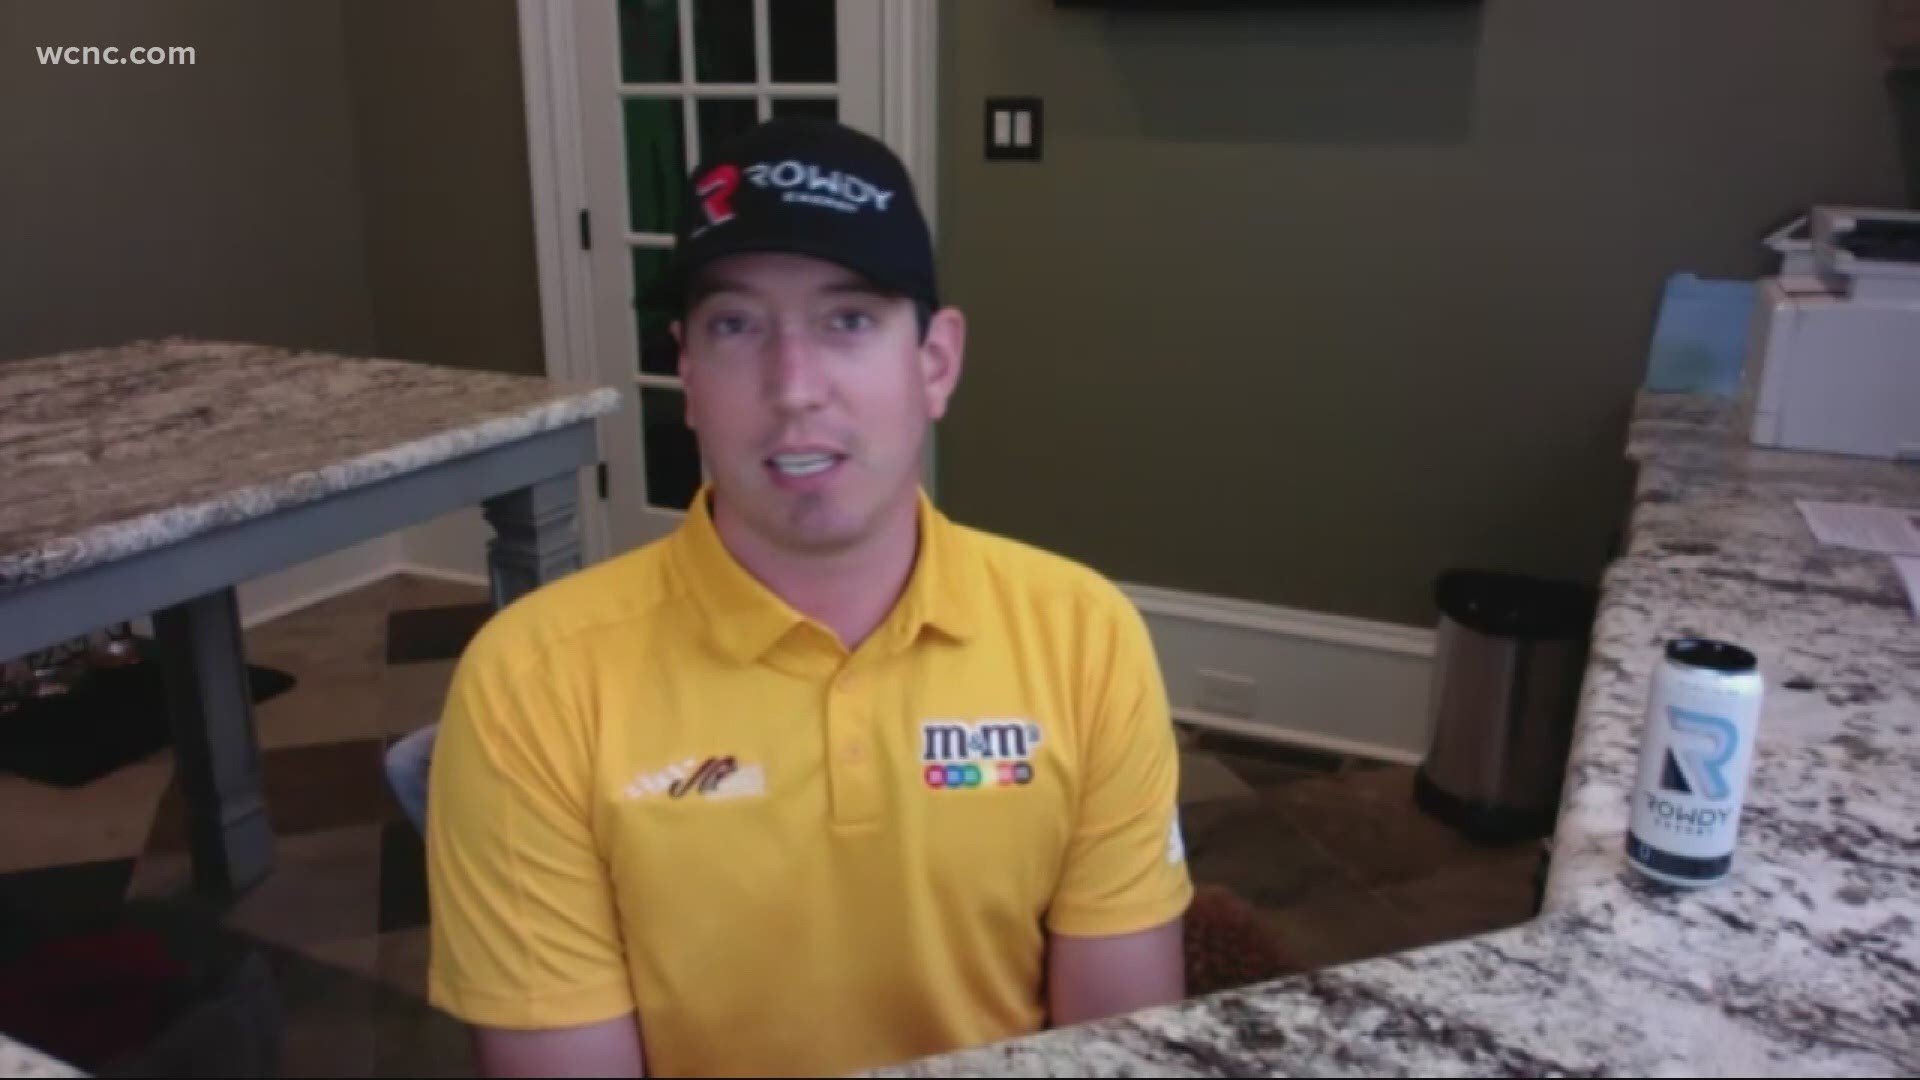 Kyle Busch looking for his first win in the playoffs season also talks about his son wanting to follow in his foot steps.